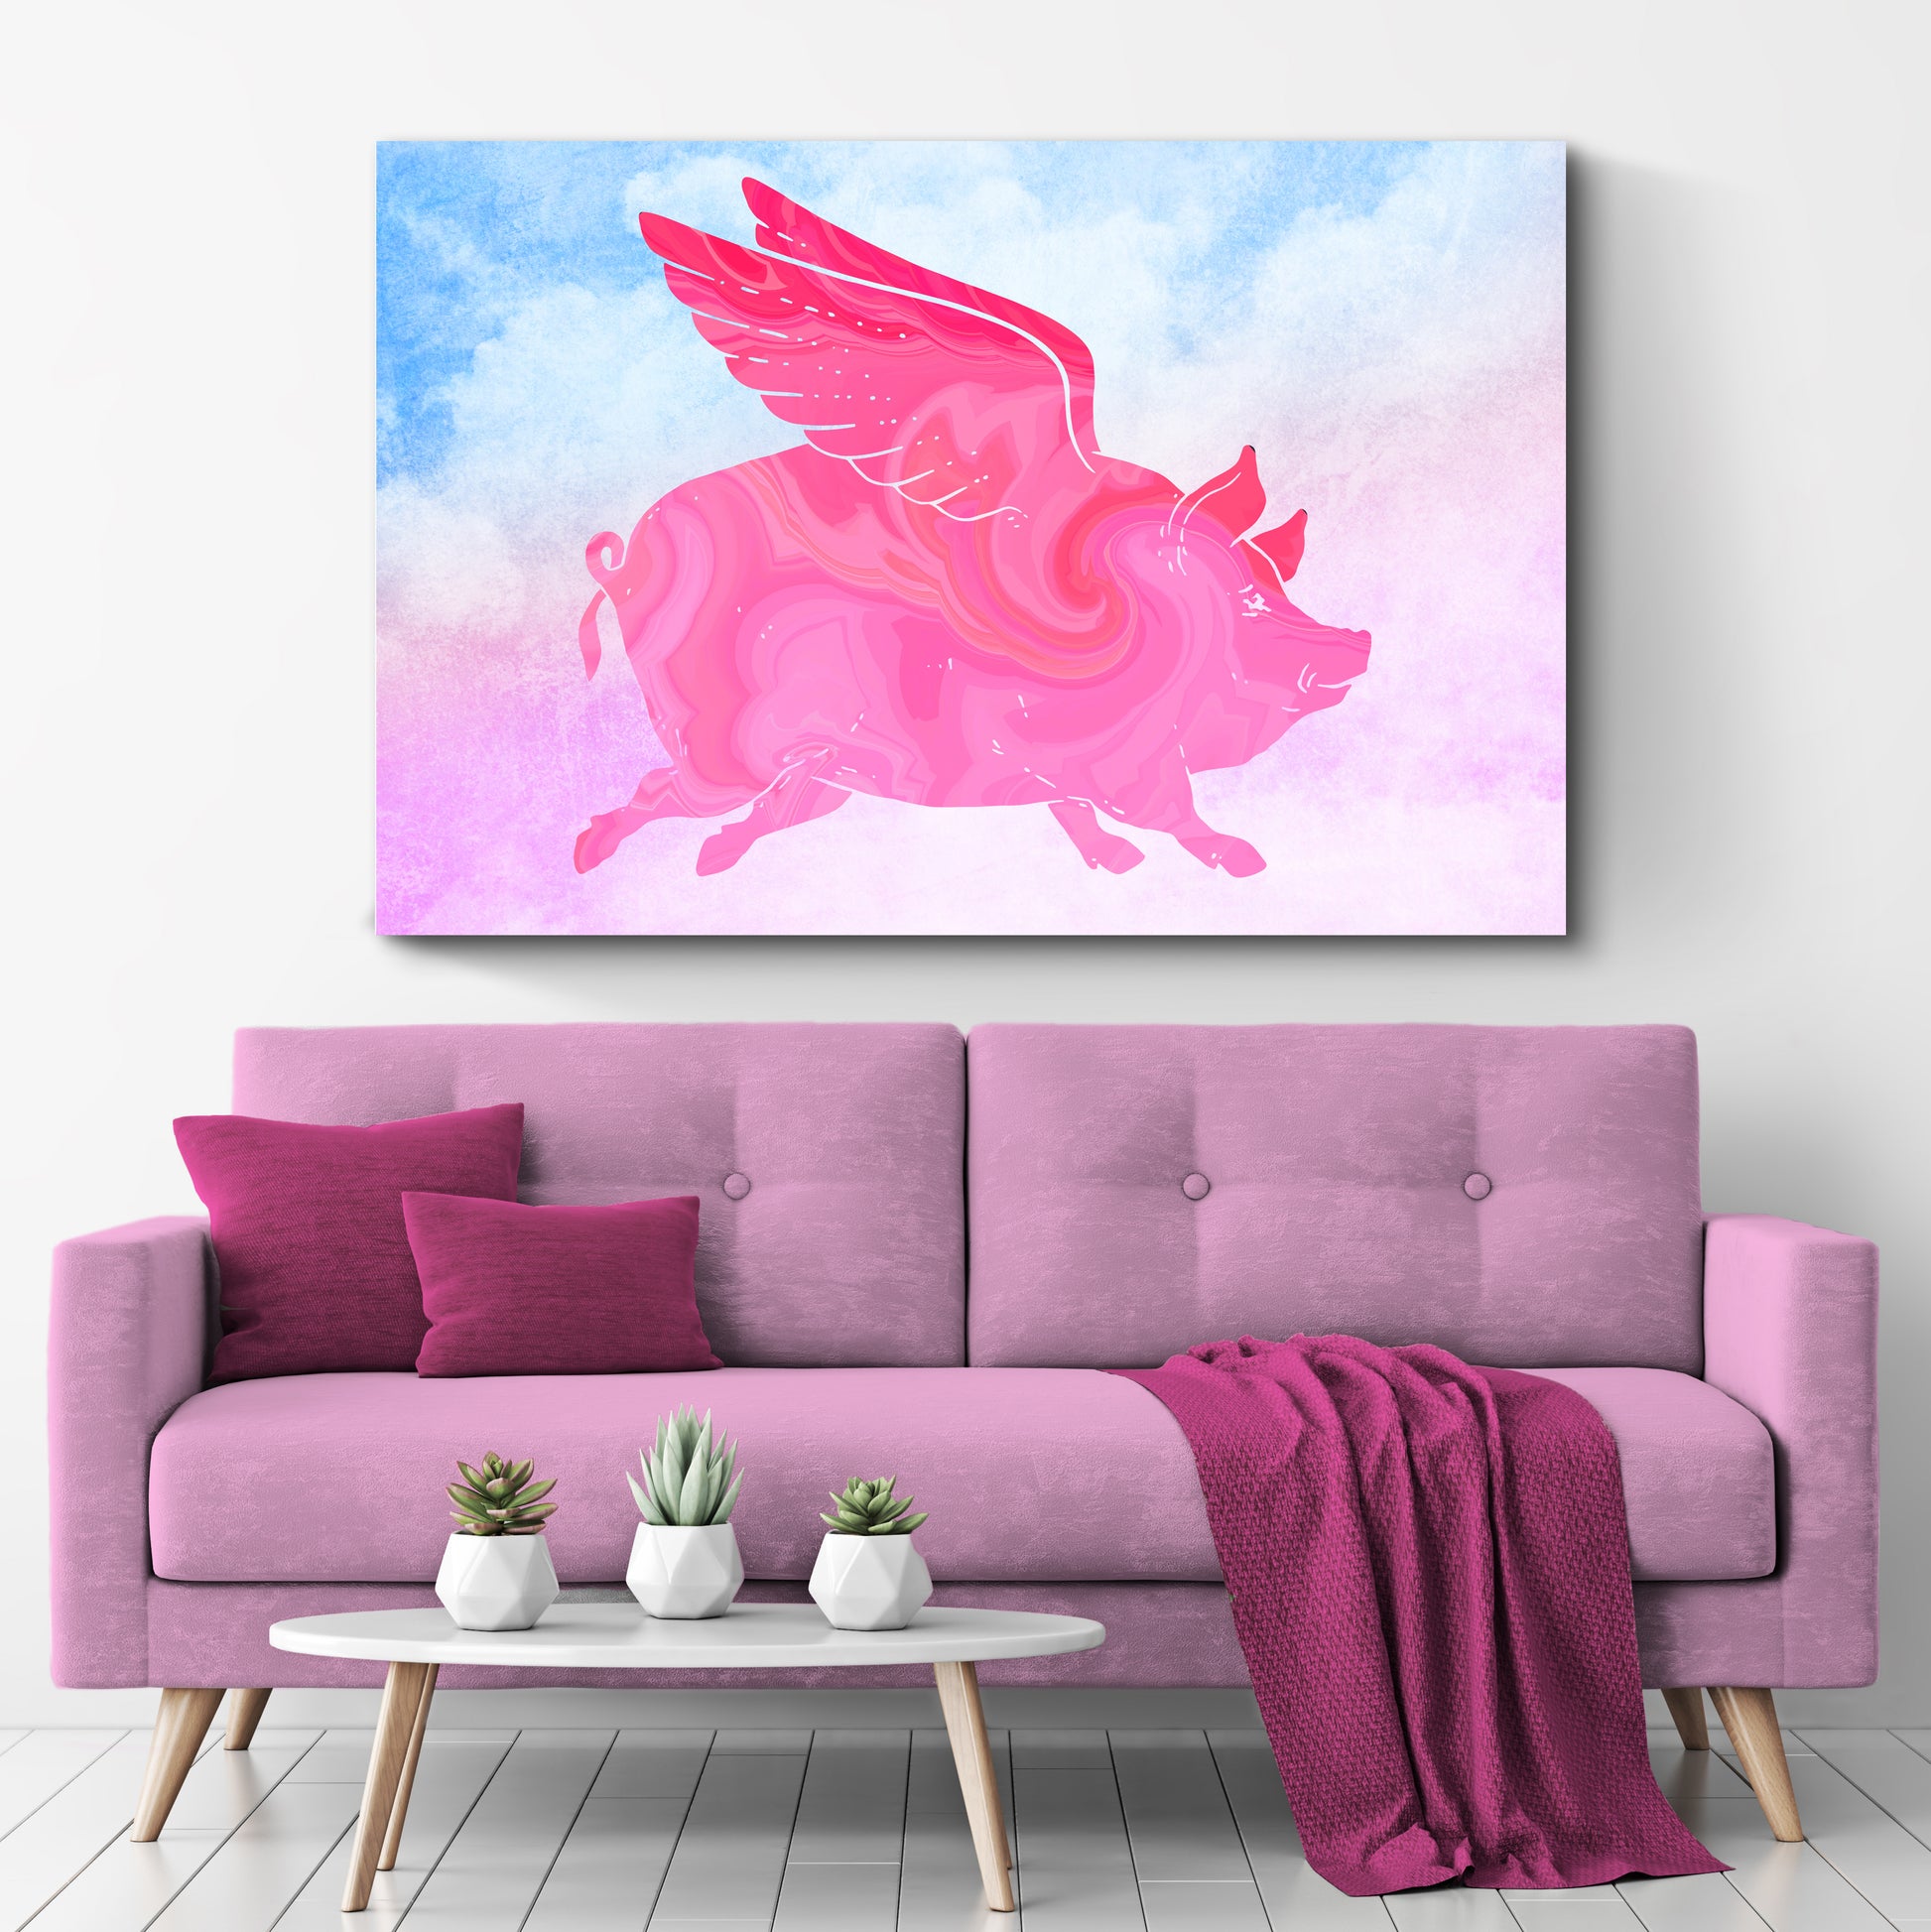 Flying Pig Artwork Canvas Wall Art Style 2 - Image by Tailored Canvases